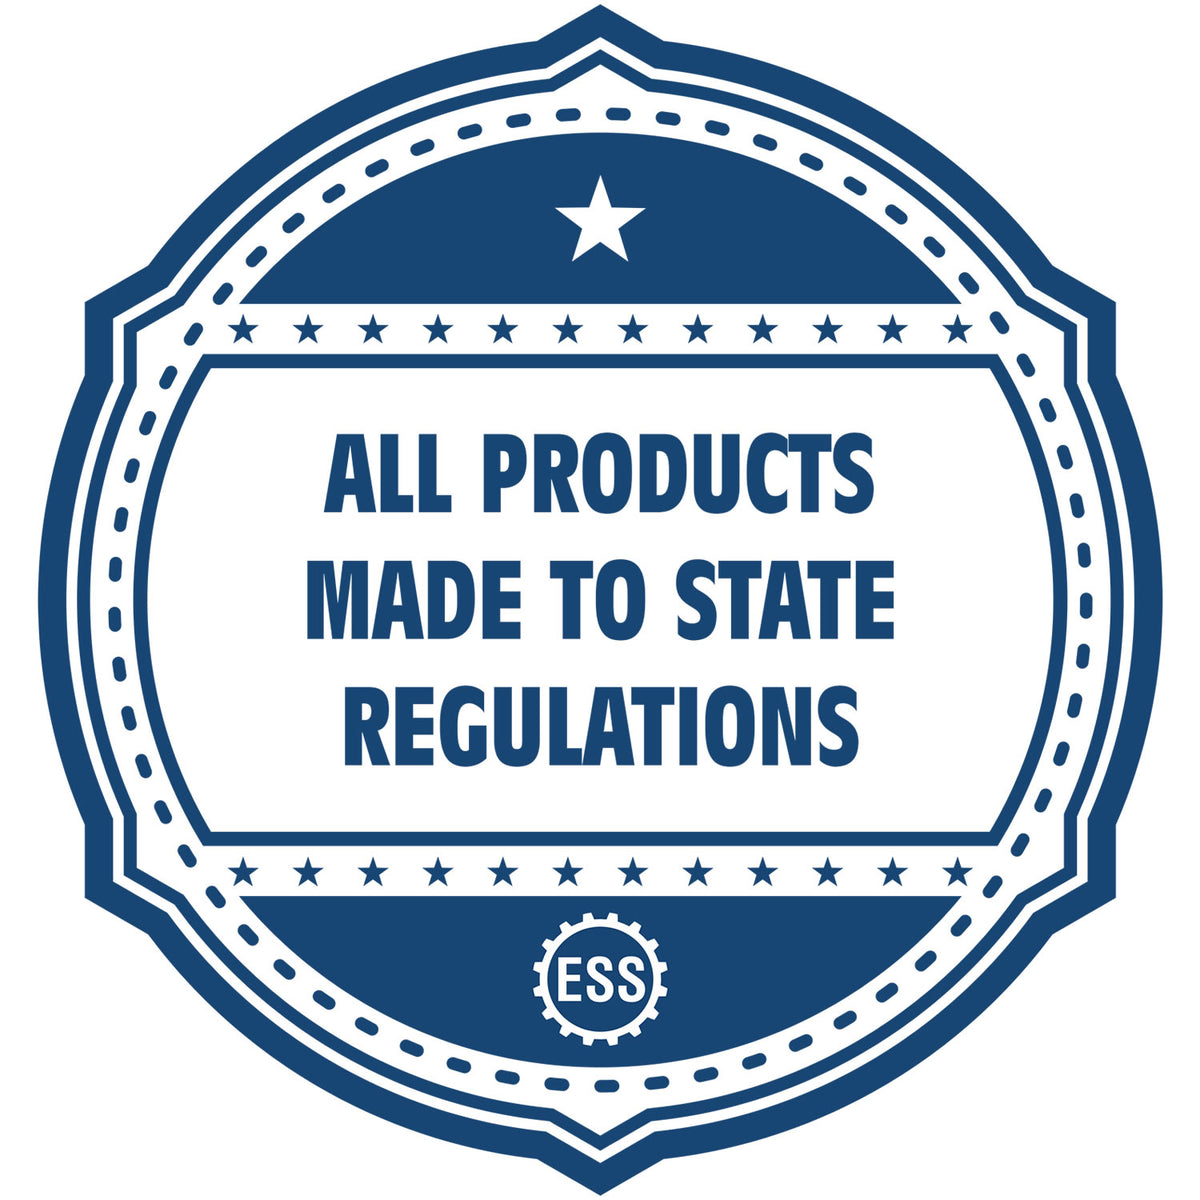 A blue icon or badge for the Gift Michigan Land Surveyor Seal showing that this product is made in compliance with state regulations.